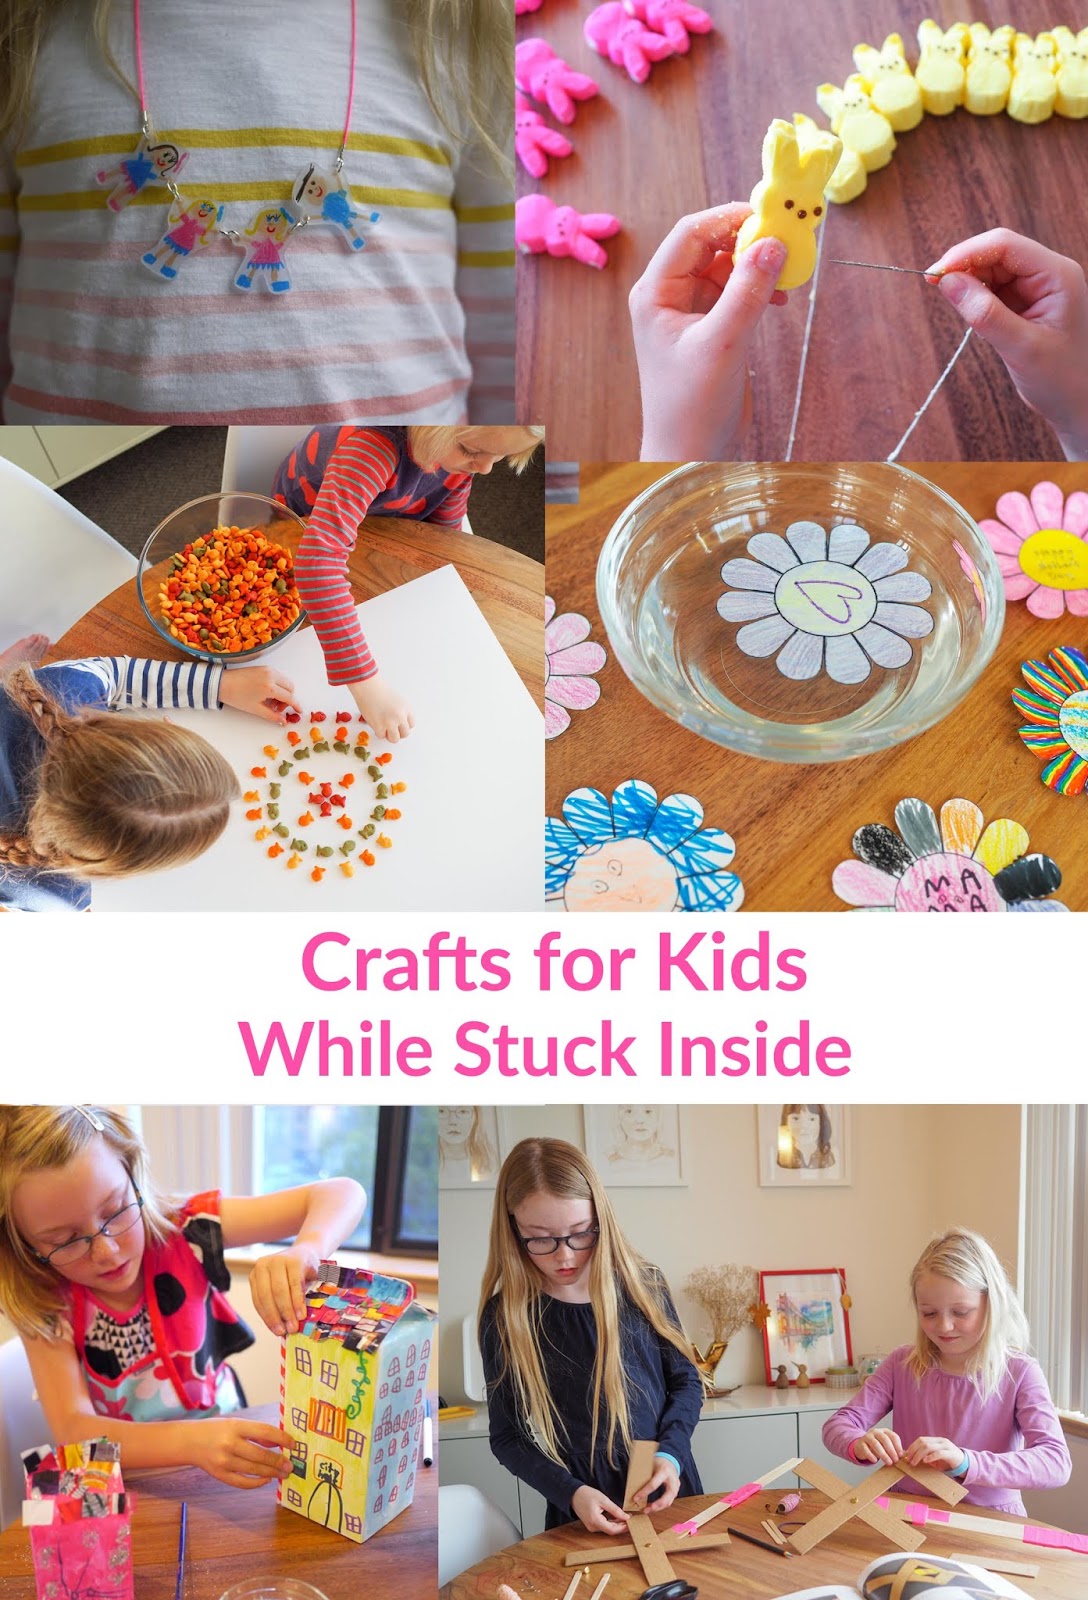 The Grown-Up's Guide to Crafting with Kids: 25+ fun and easy craft